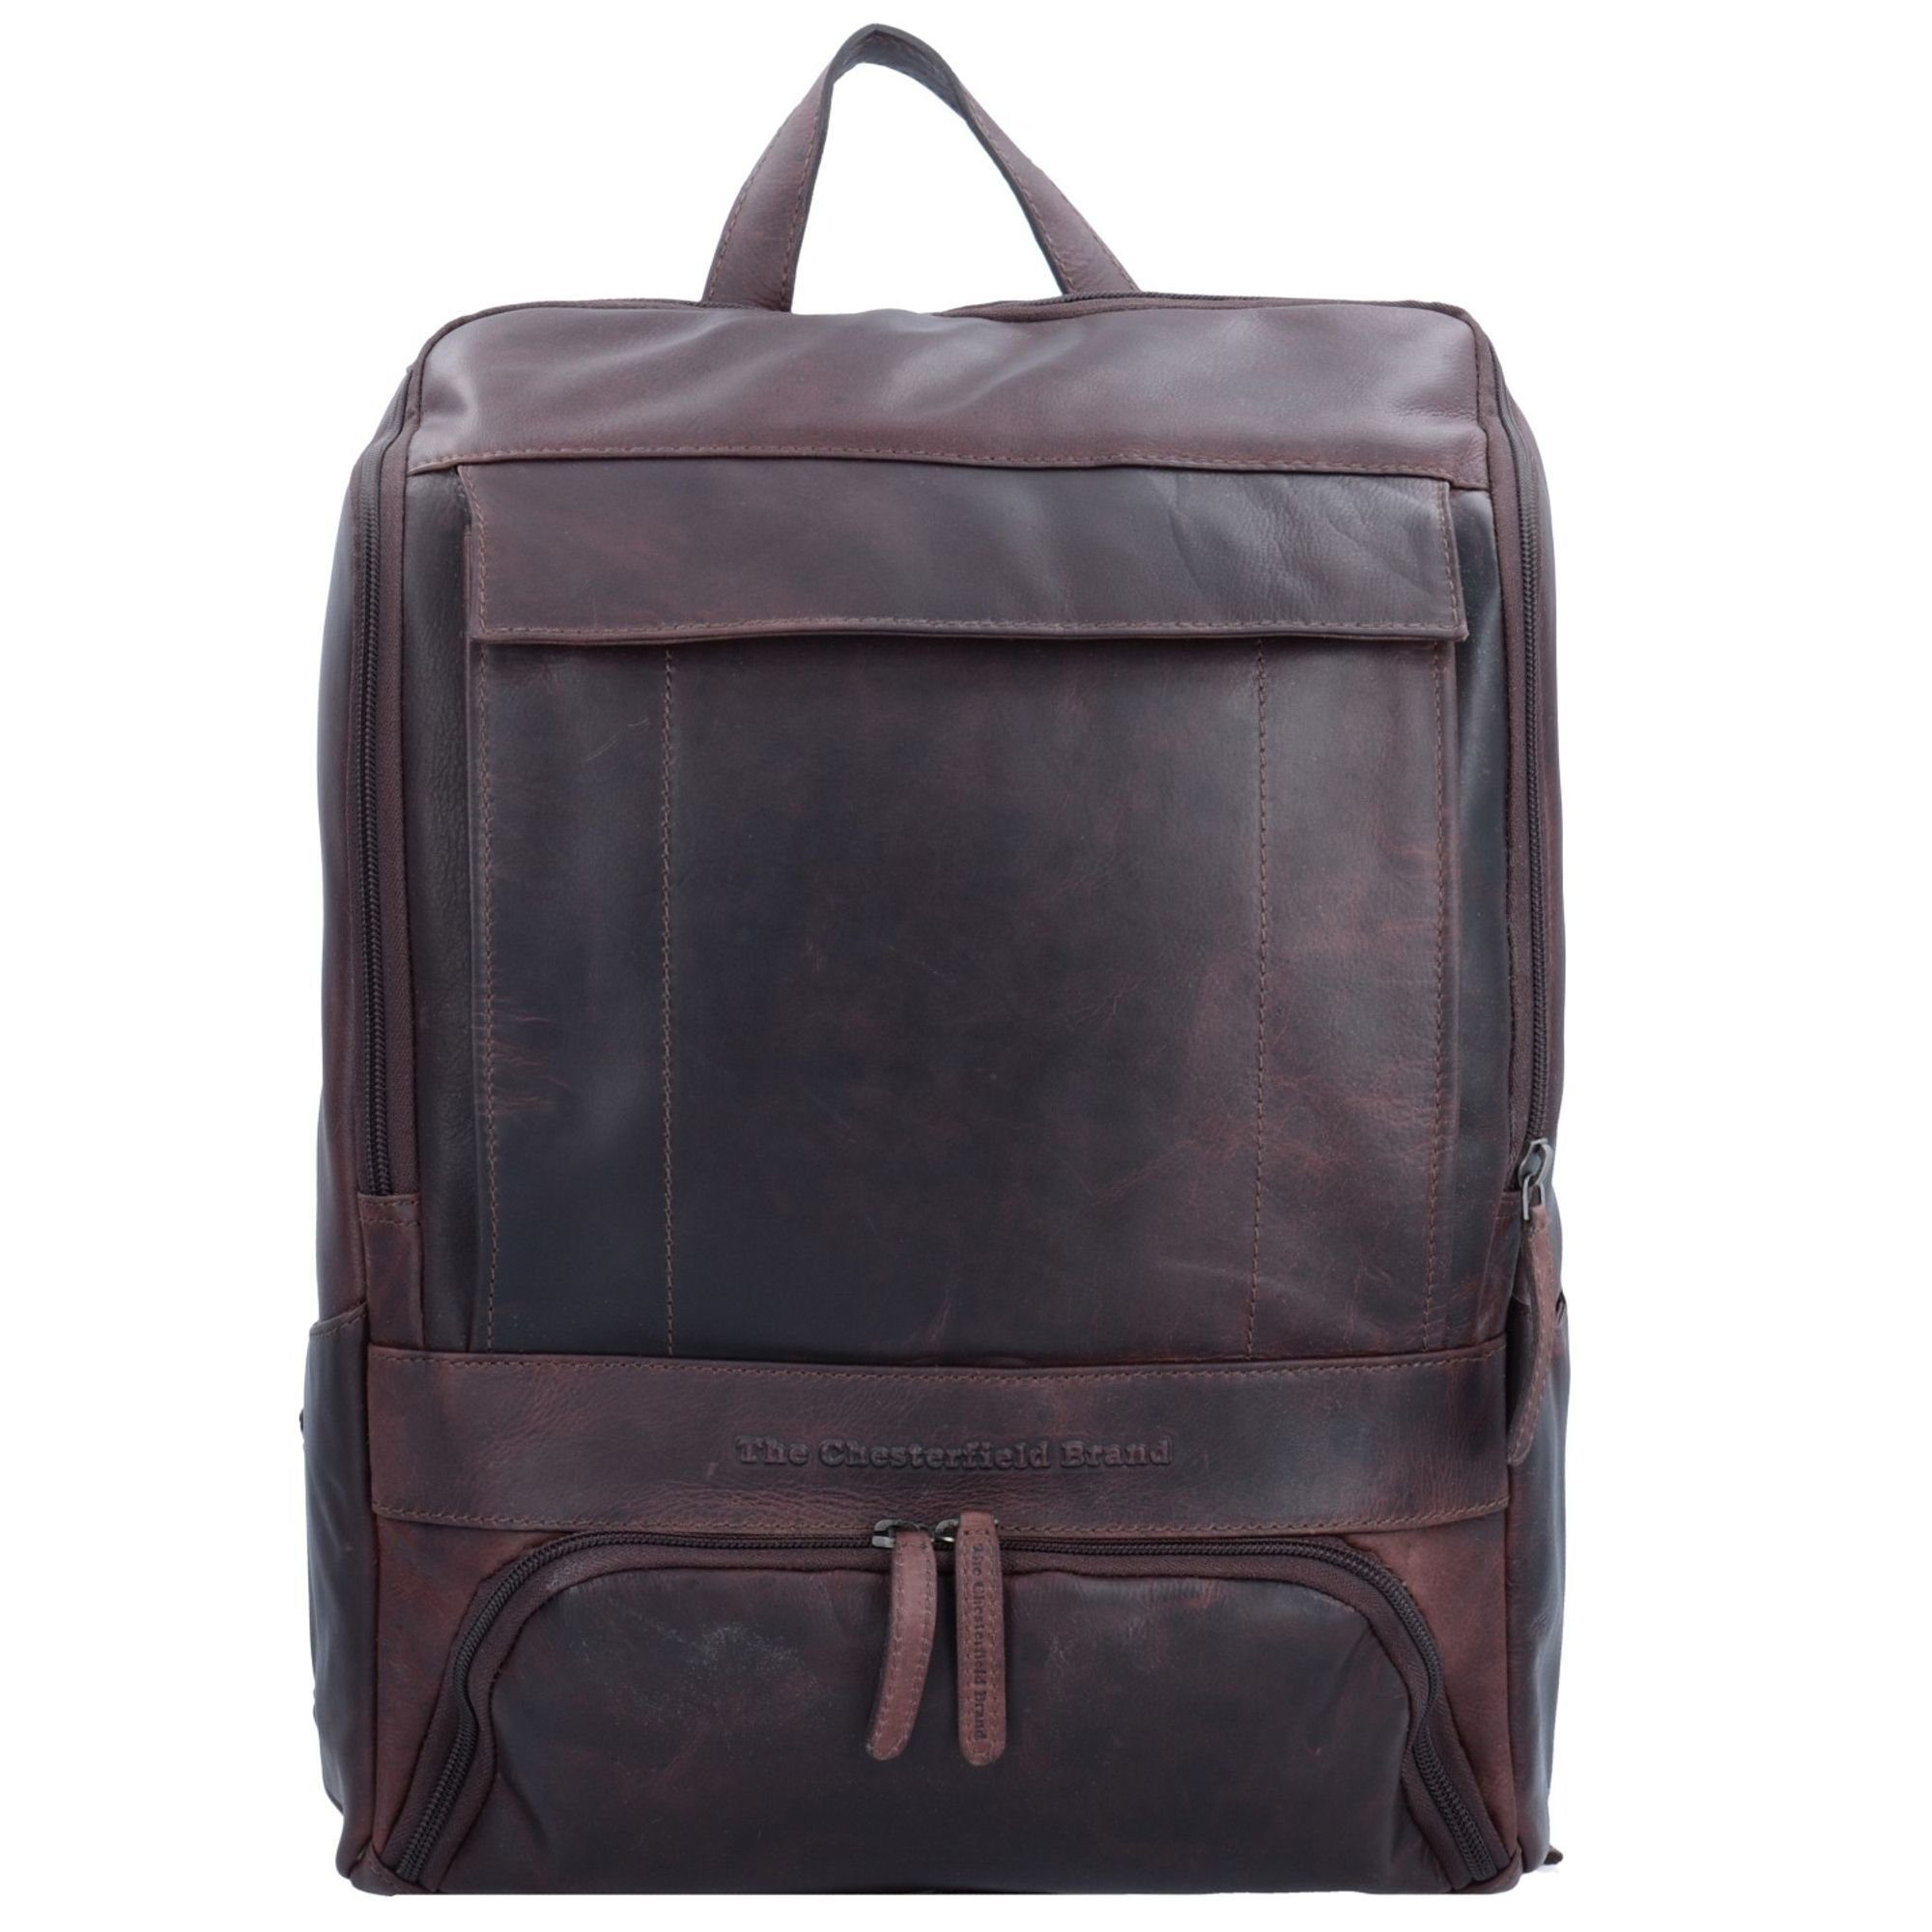 Pull The brown Wax Brand Laptoprucksack Chesterfield Up, Leder